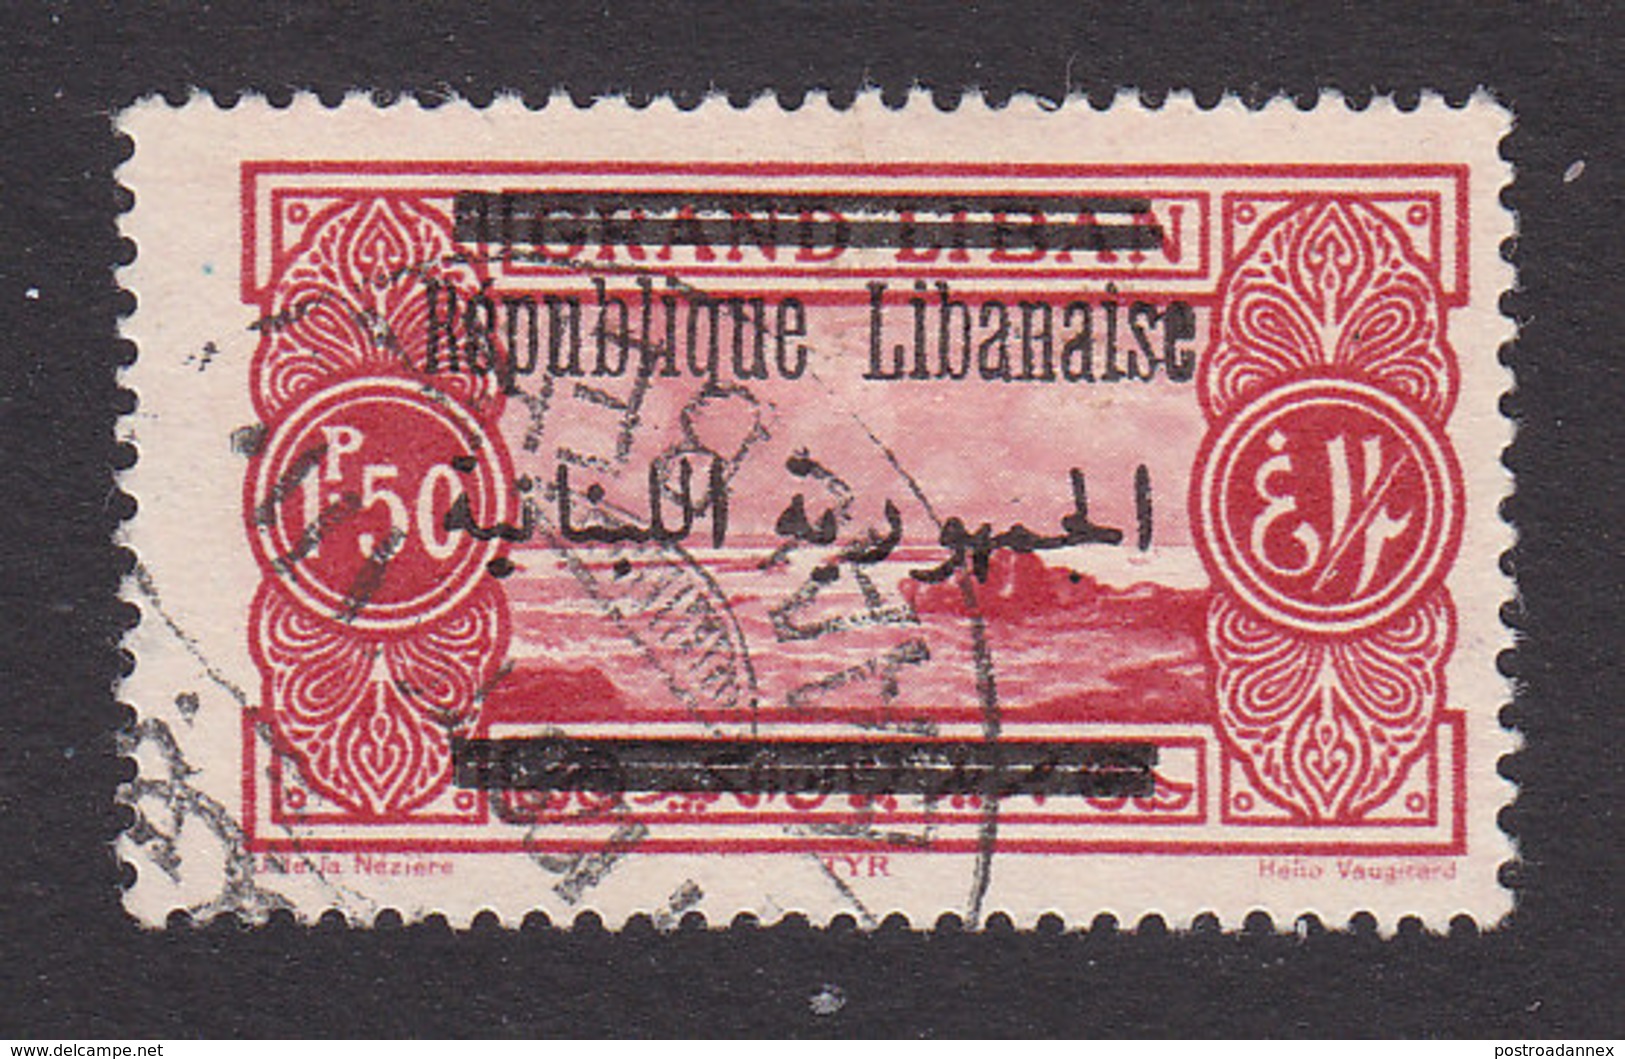 Lebanon, Scott #89, Used, Scenes Of Lebanon Surcharged, Issued 1928 - Used Stamps